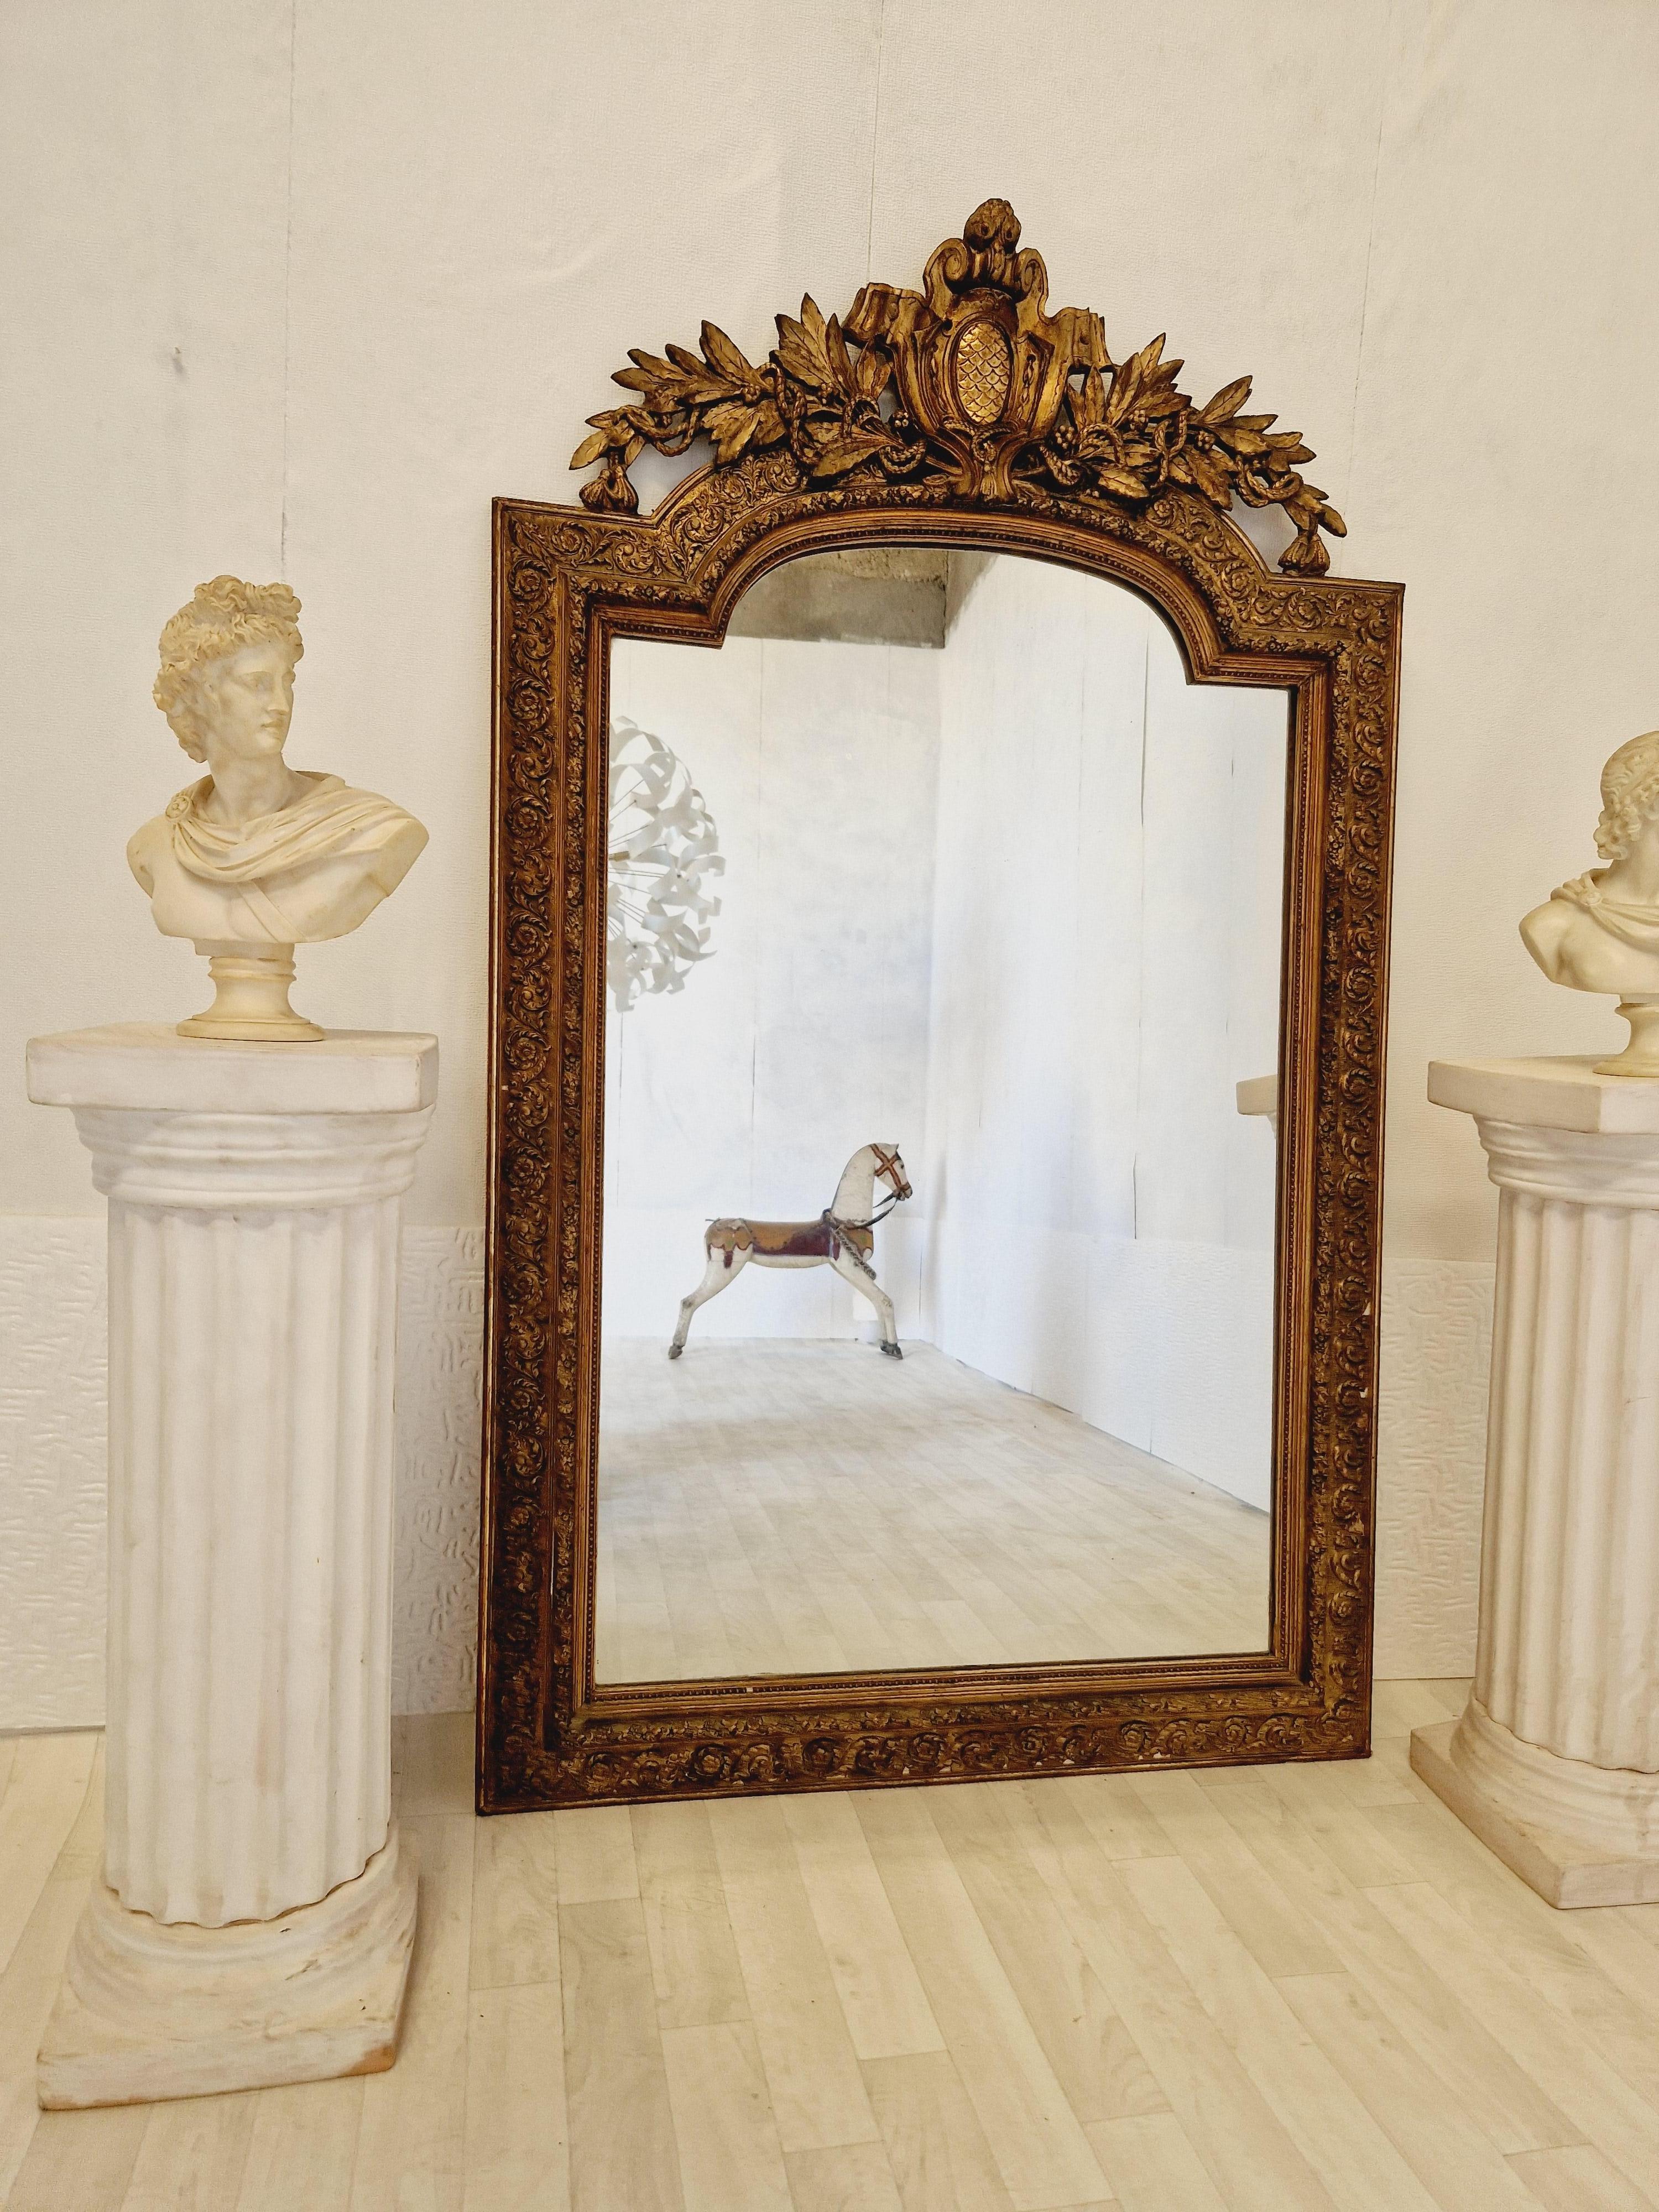 Add a touch of Antique aesthetics to your home with this Giltwood framed Louis XVI Style wall mirror. The rectangular mirror boasts an impressive height of 156 cm and a width of 93 cm, with a beautiful detailing. The mirror is of Louis XVI has a